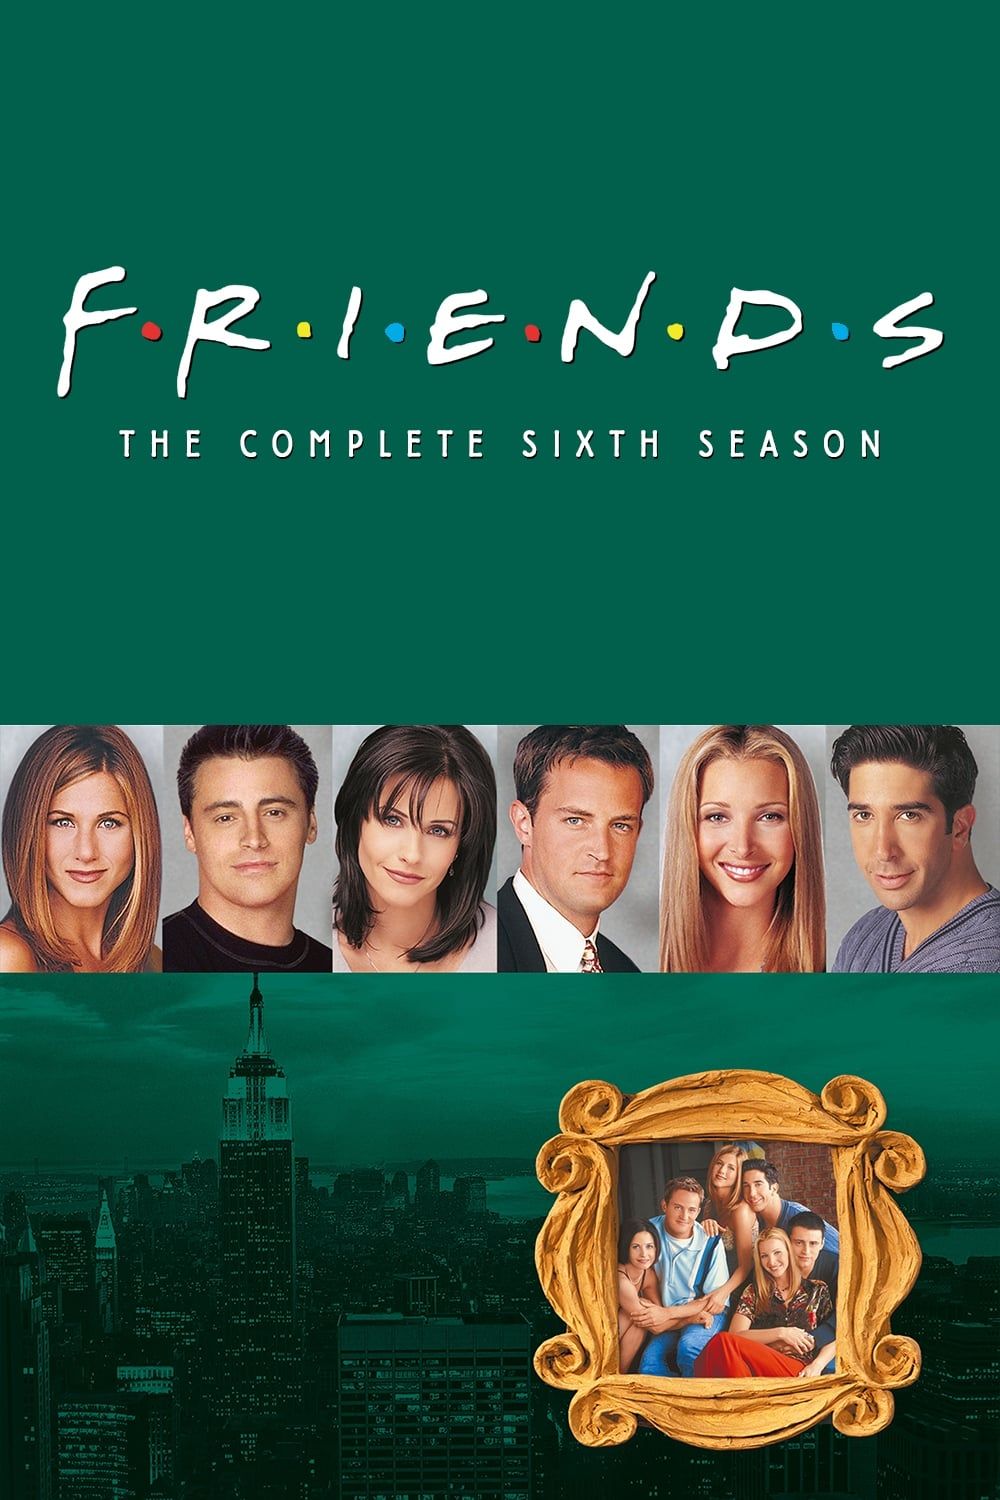 Friends Complete Series] Where to Watch Friends Online ?